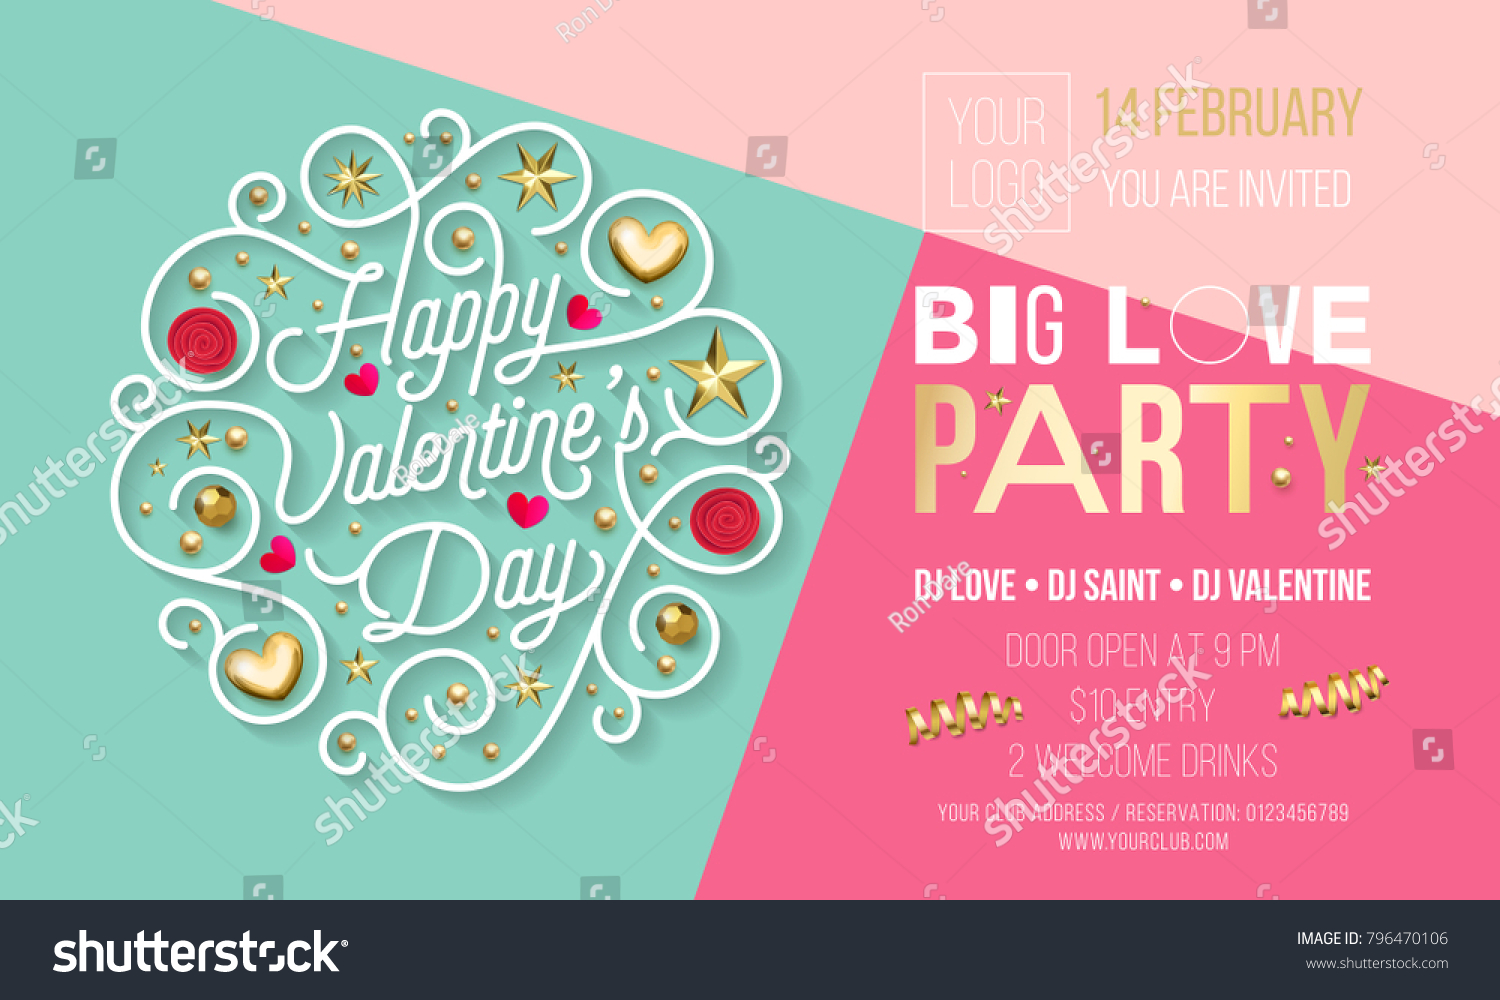 valentine-day-party-invitation-design-template-stock-vector-royalty-free-796470106-shutterstock